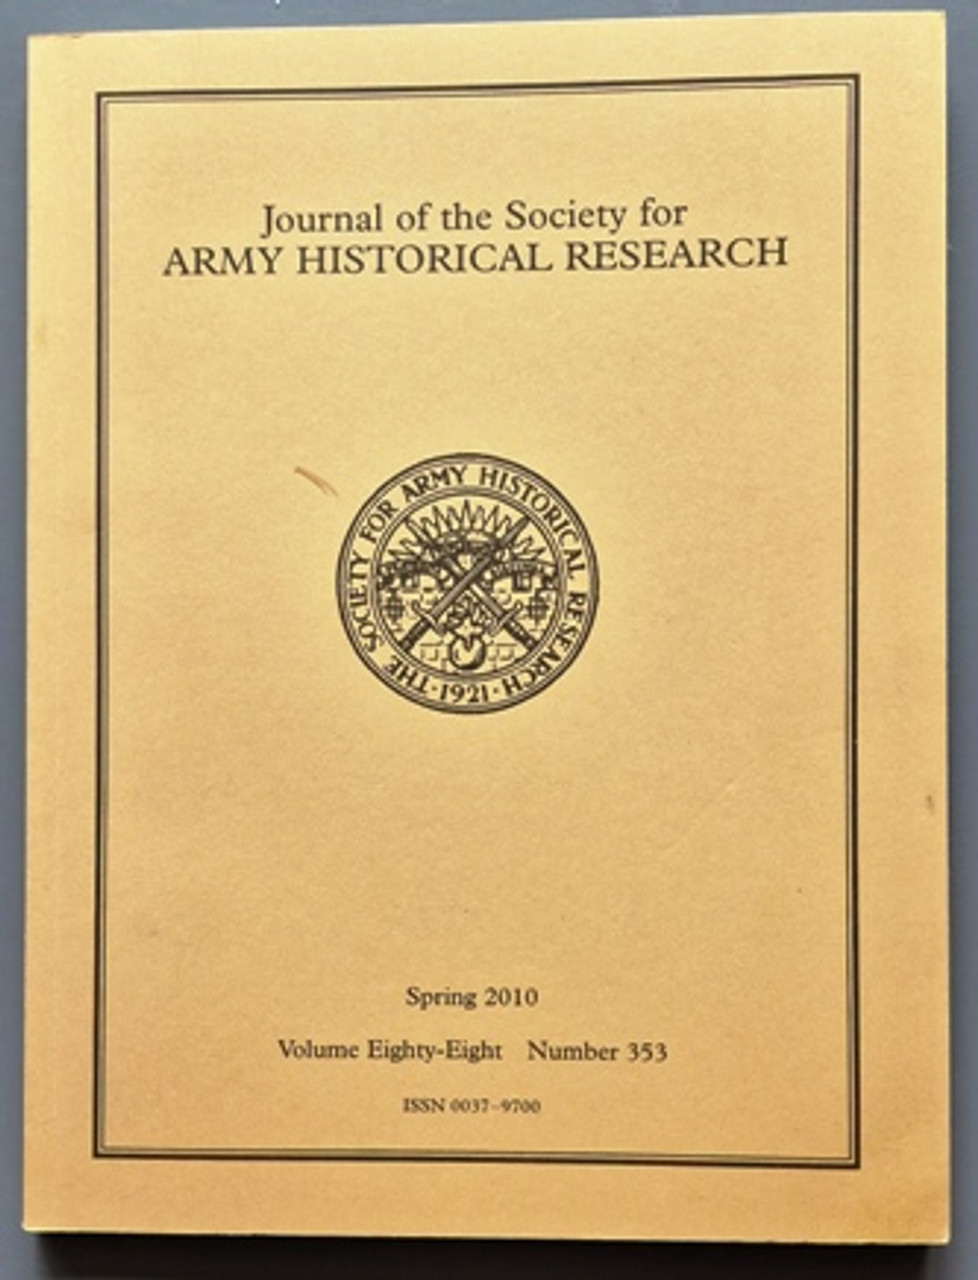 2010 (Spring Volume) Journal Of The Society For Army Historical Research